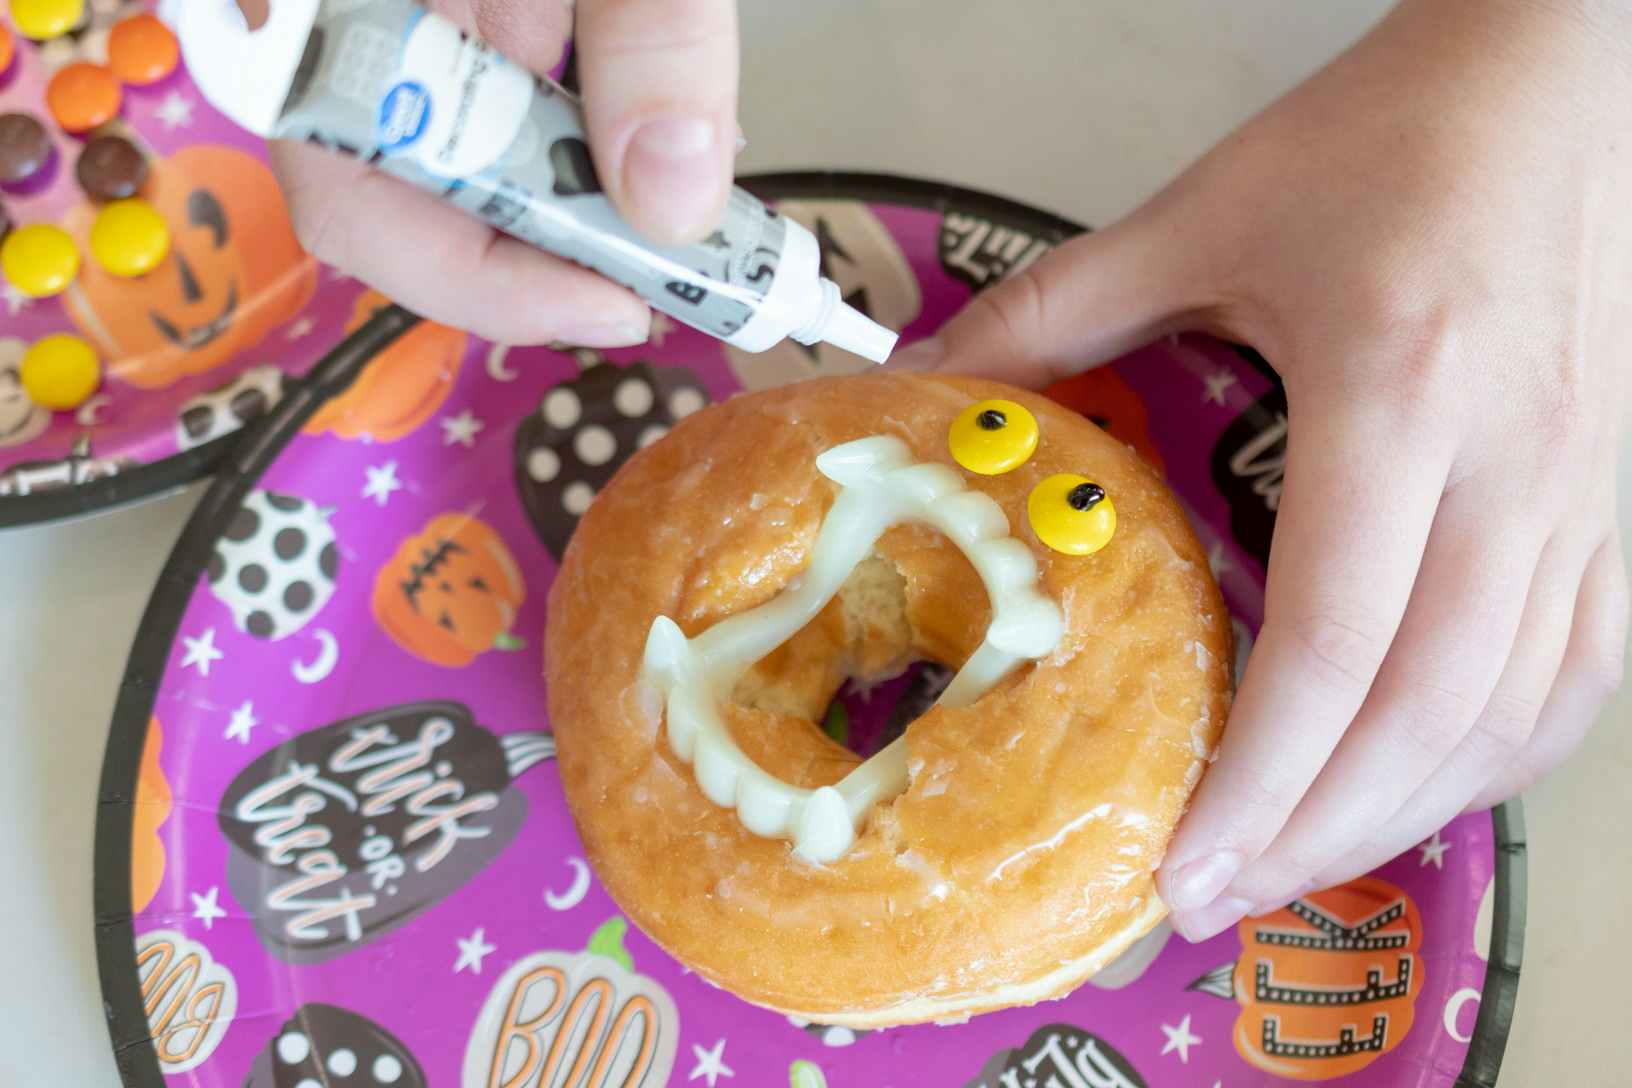 A person using black icing to add dots to the center of Reese's pieces candies attached to a donut. Plastic vampire teeth are inserted into the center of the donut.